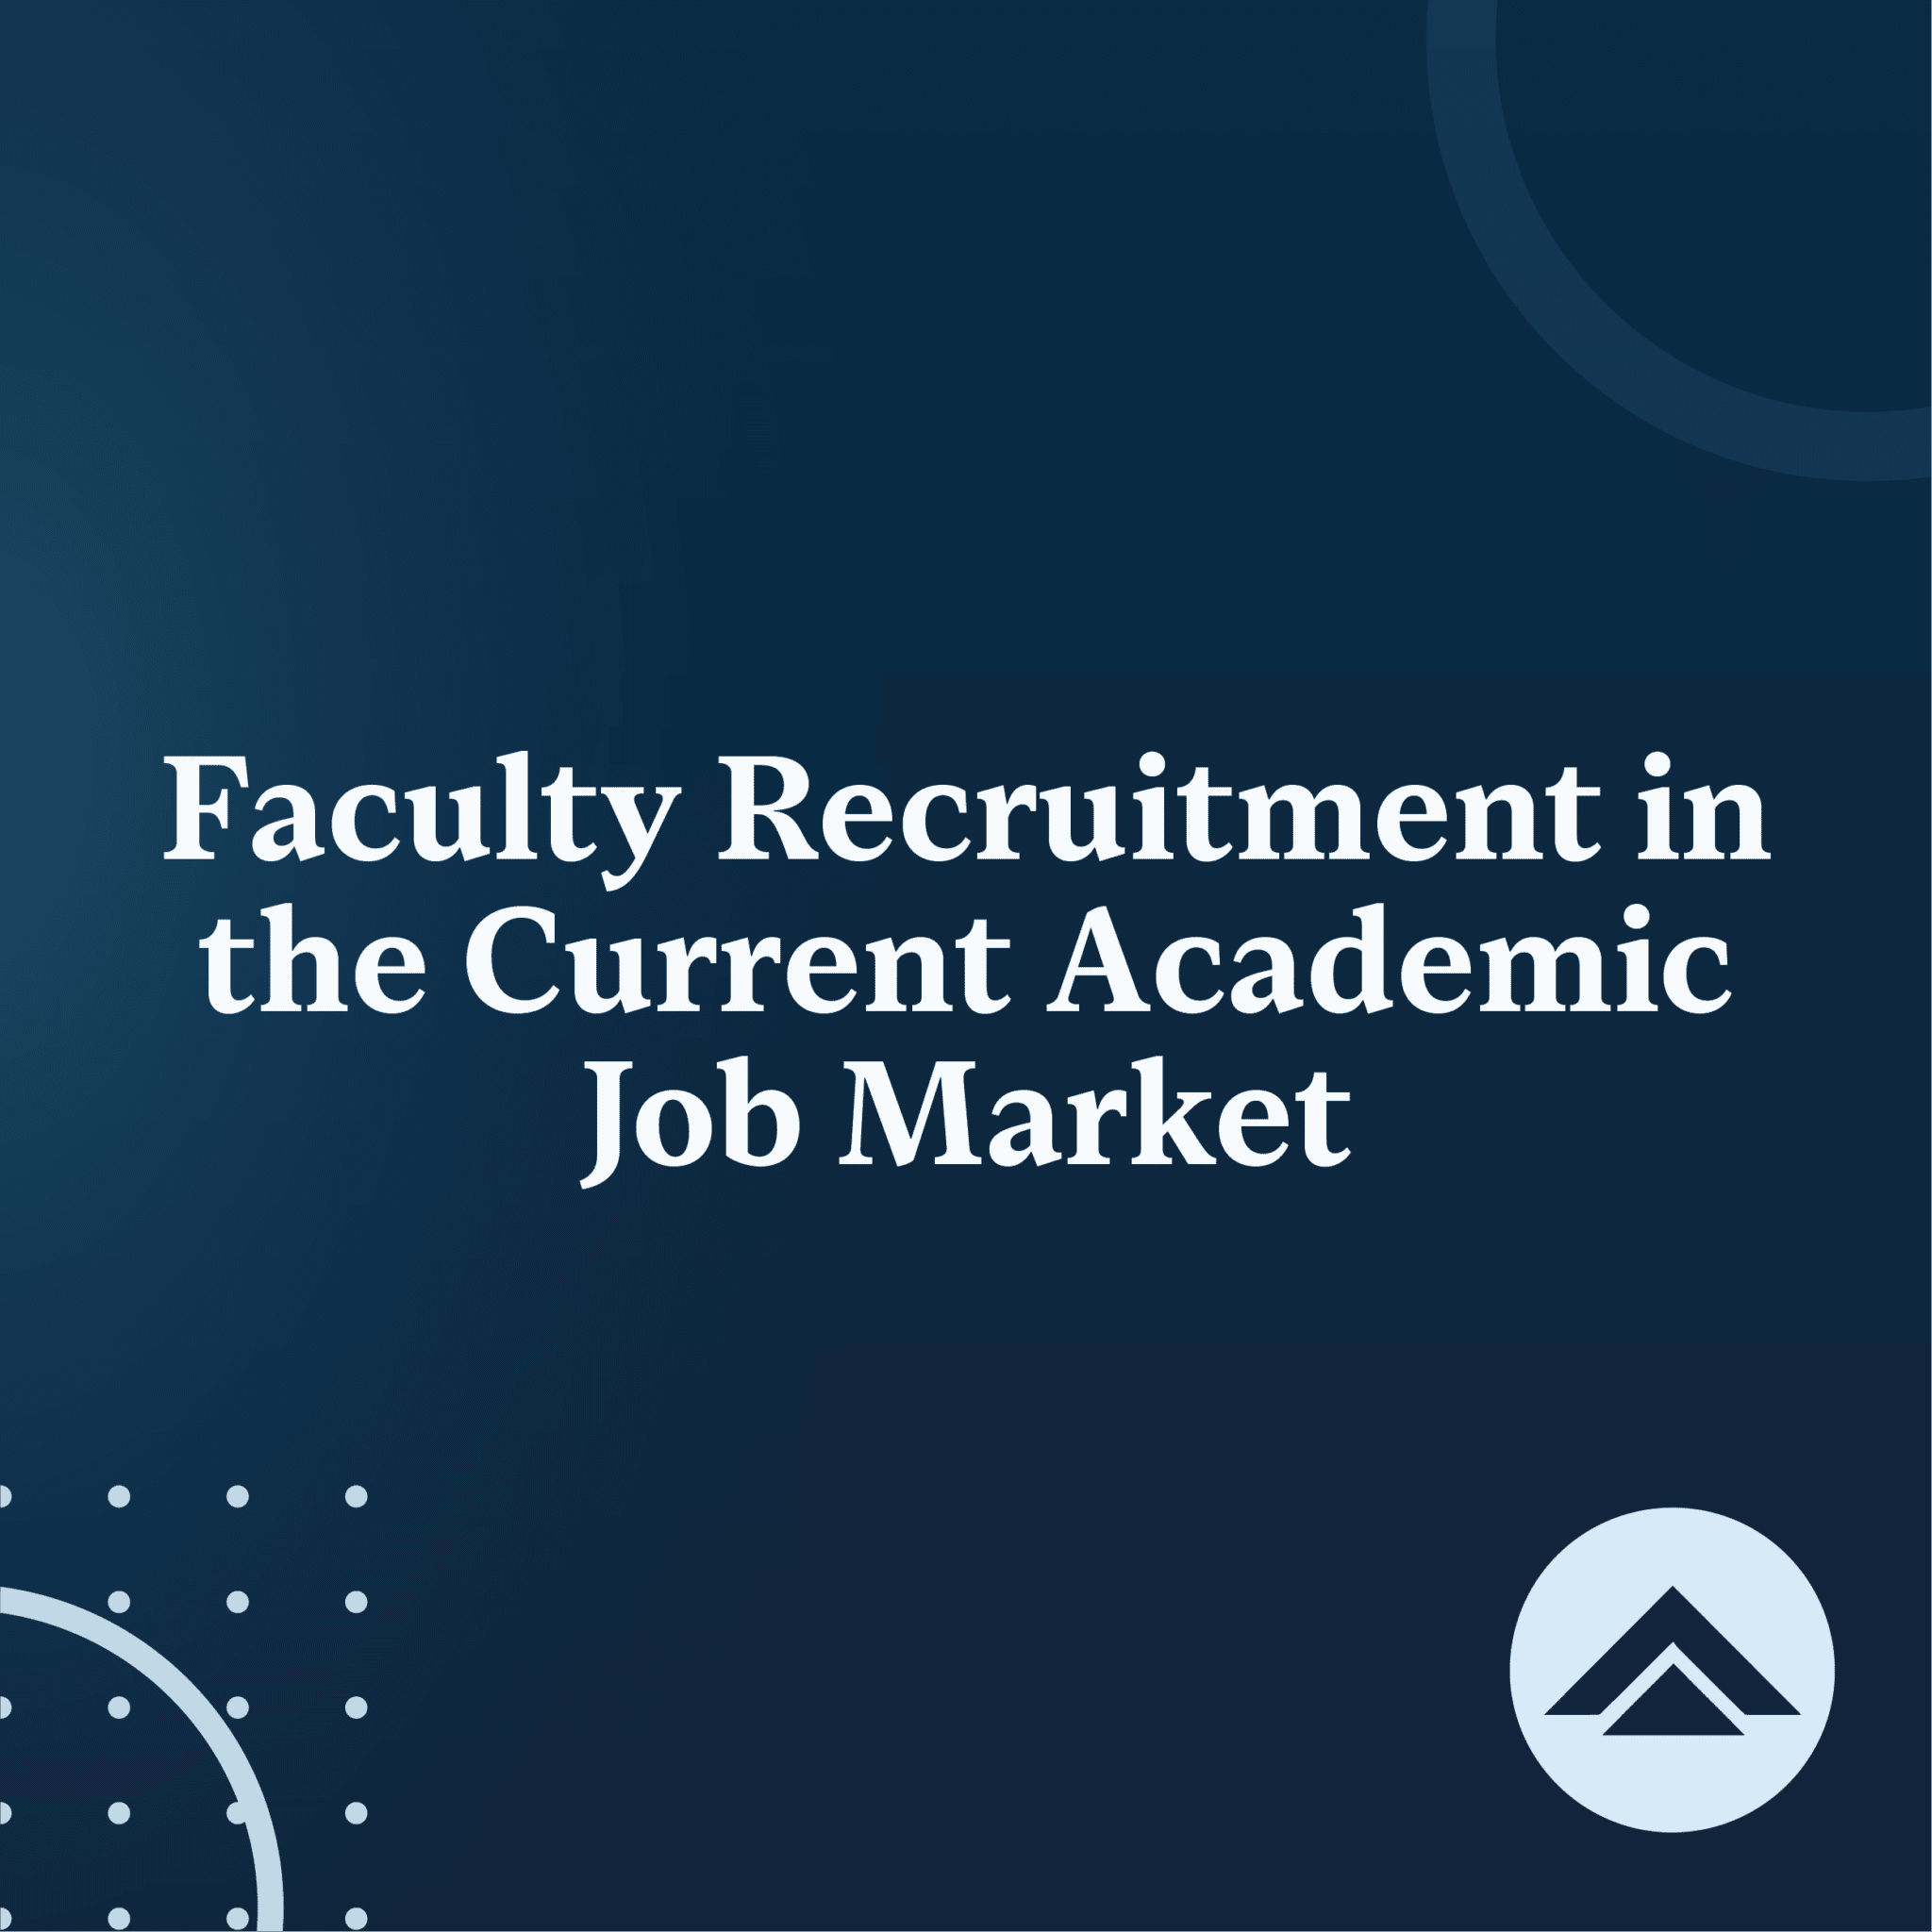 Faculty Recruitment in the Current Academic Job Market